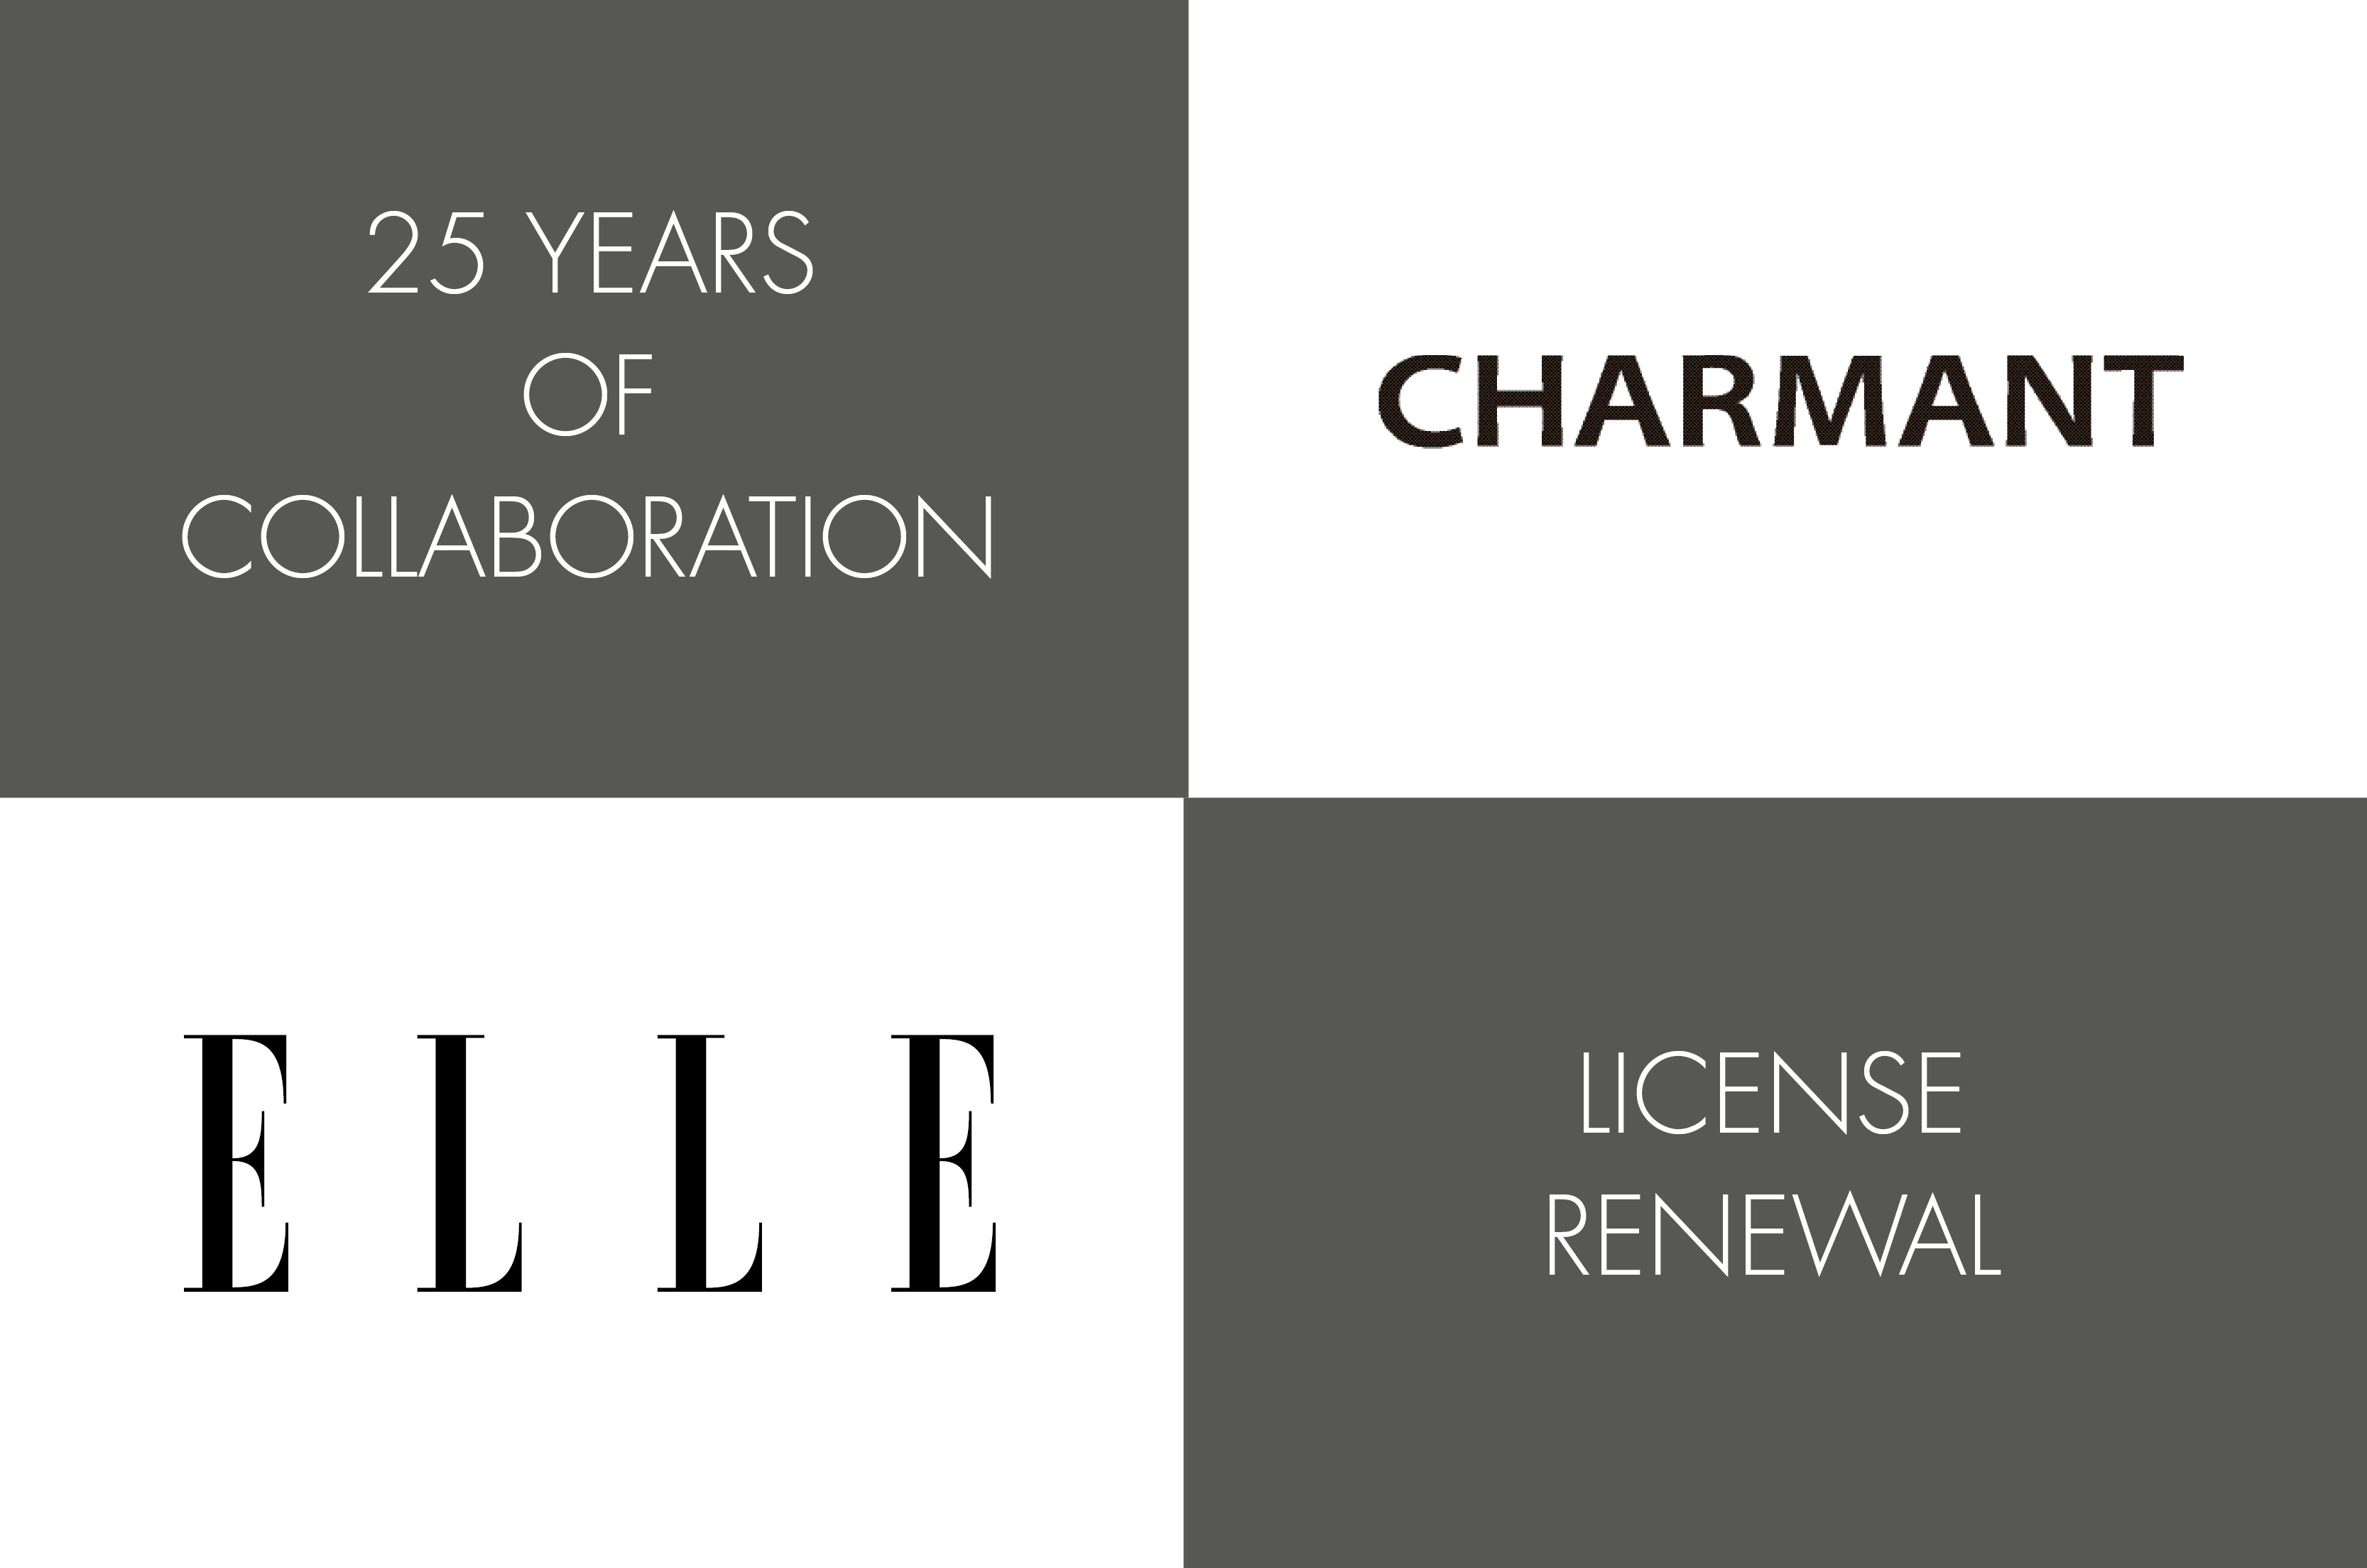 License Renewal between Elle and Charmant Group